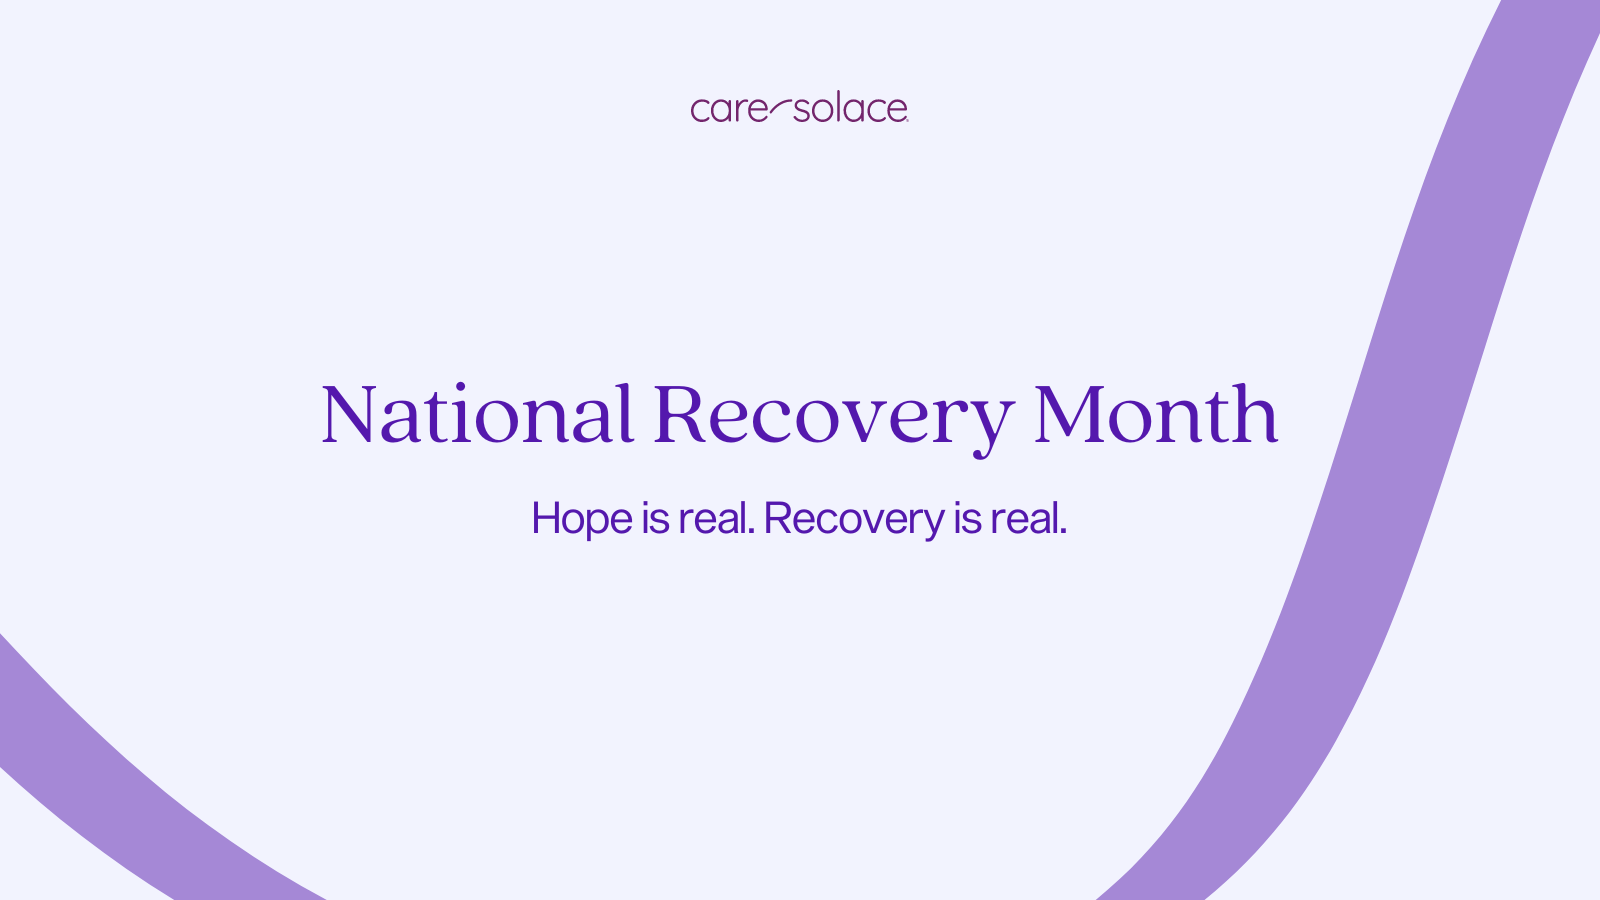 National Recovery Month - Hope is real. Recovery is real.